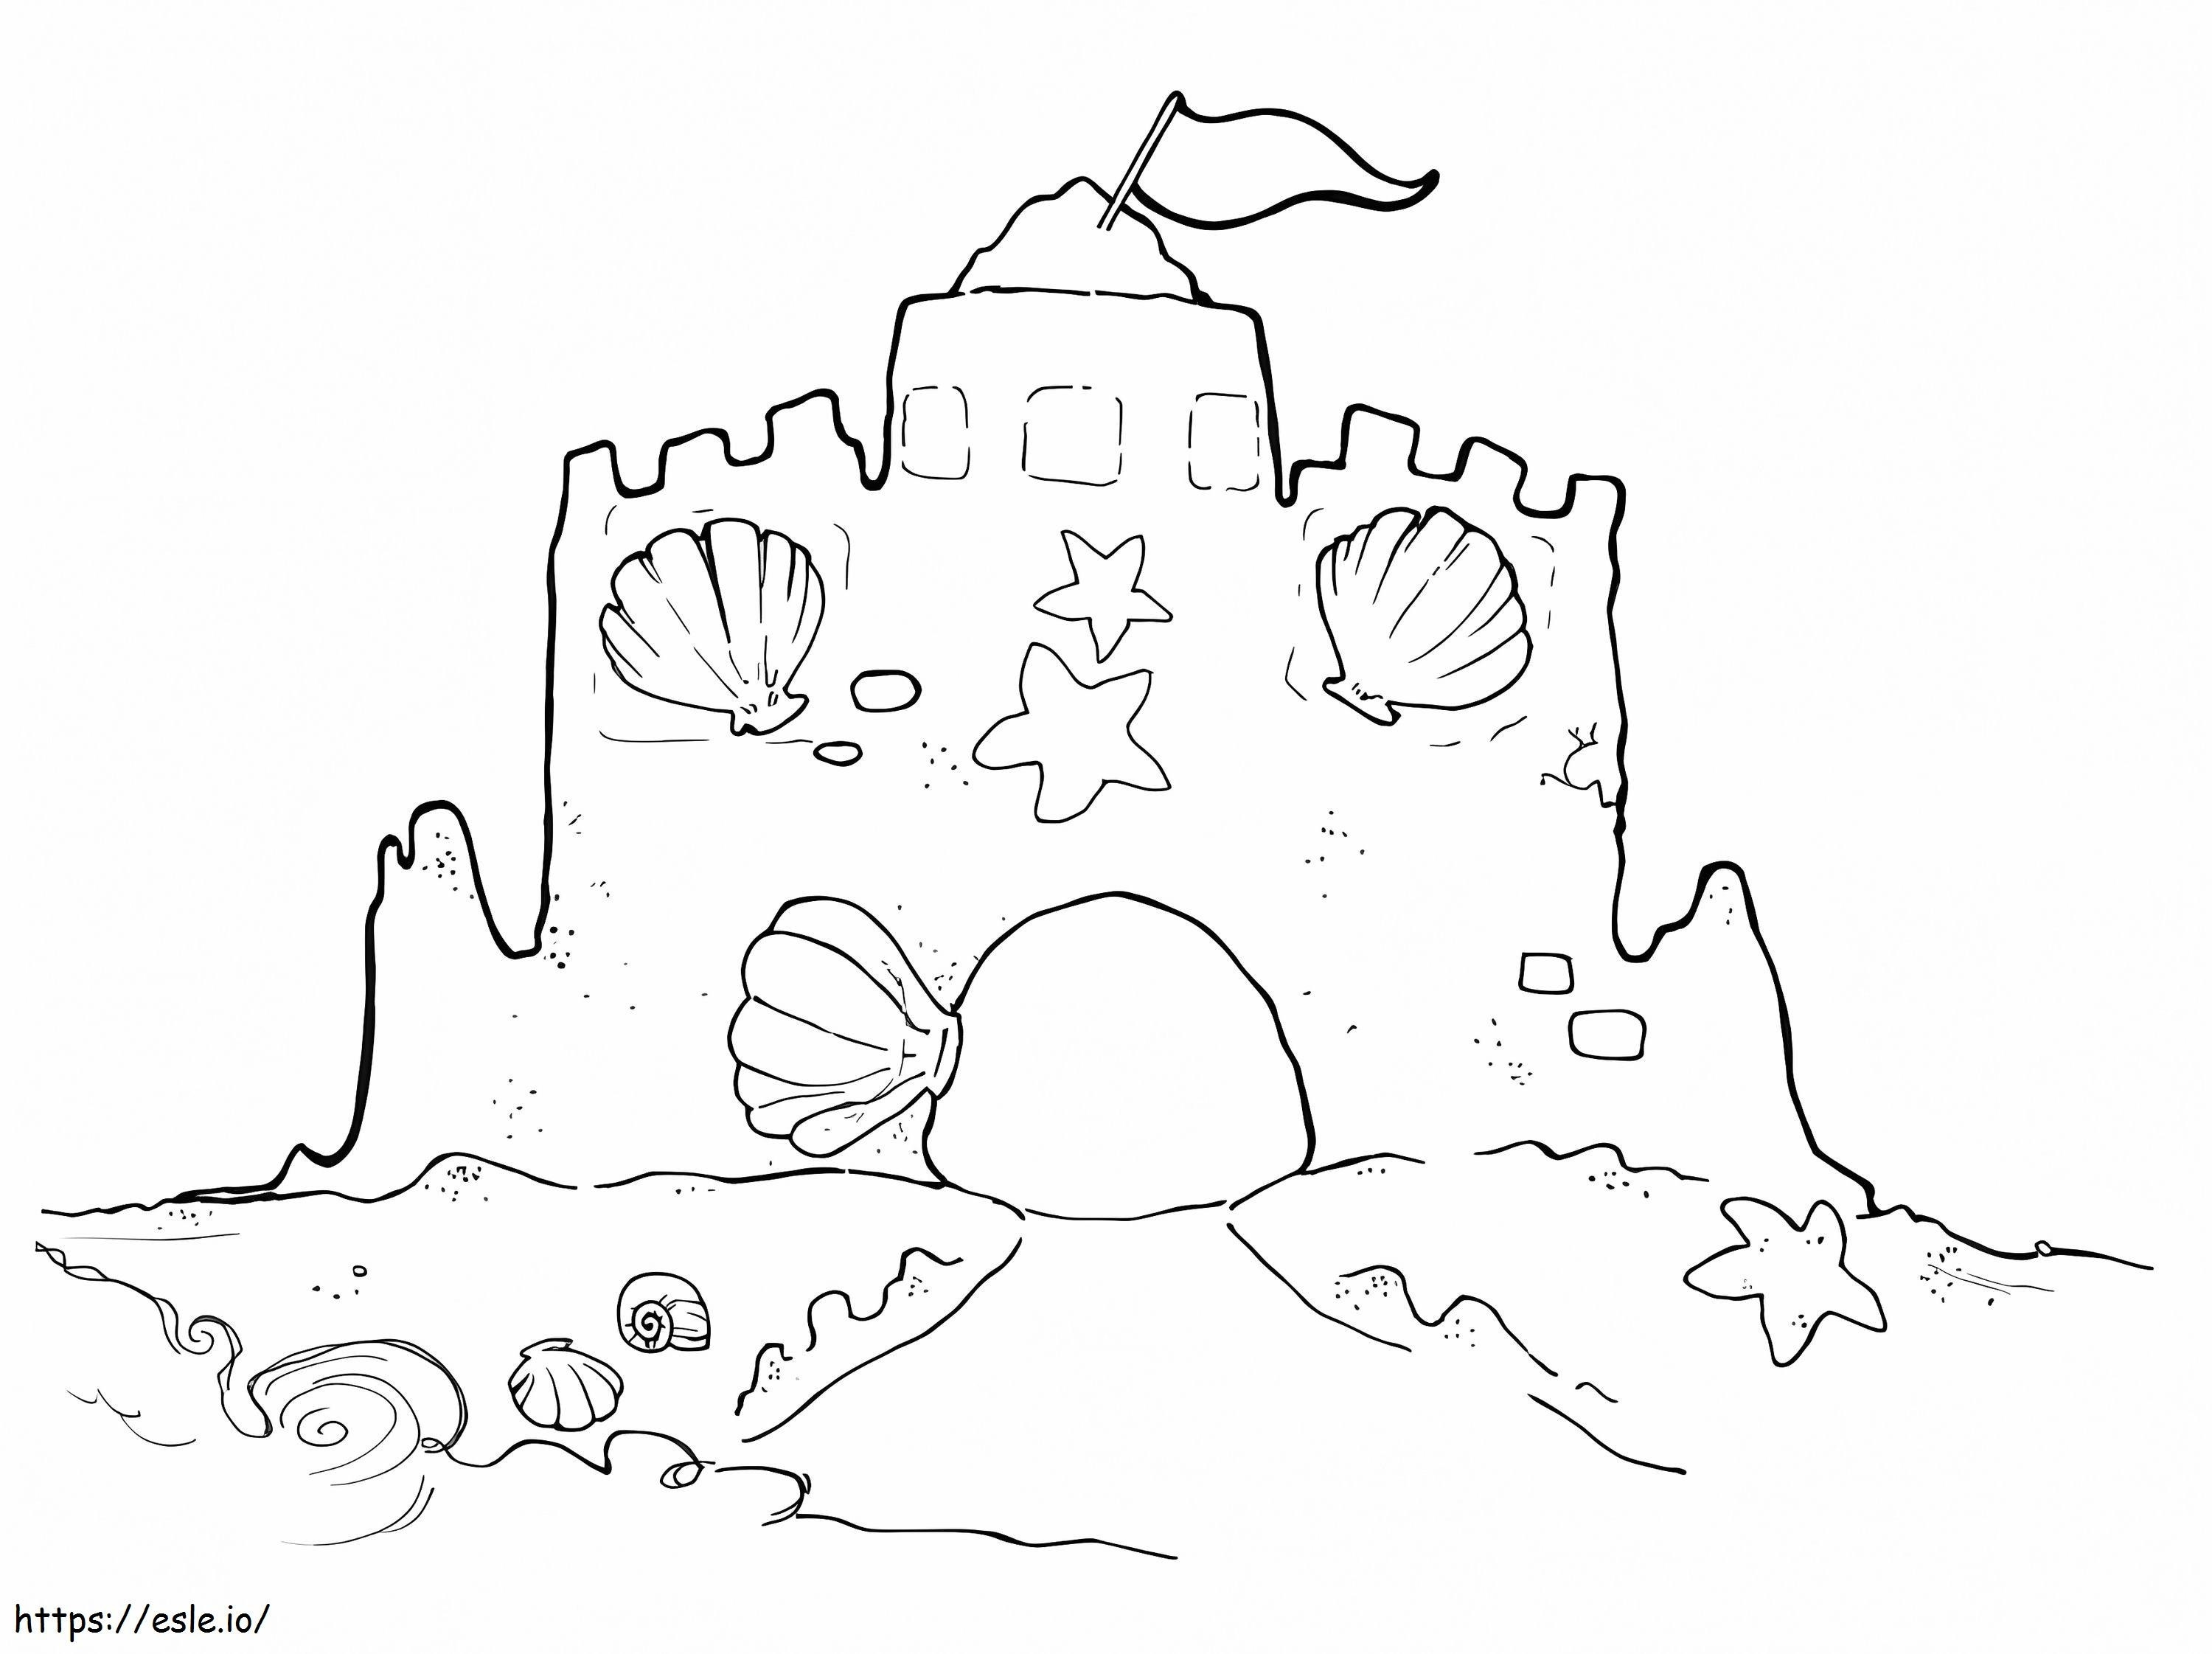 Sand Castle To Print coloring page